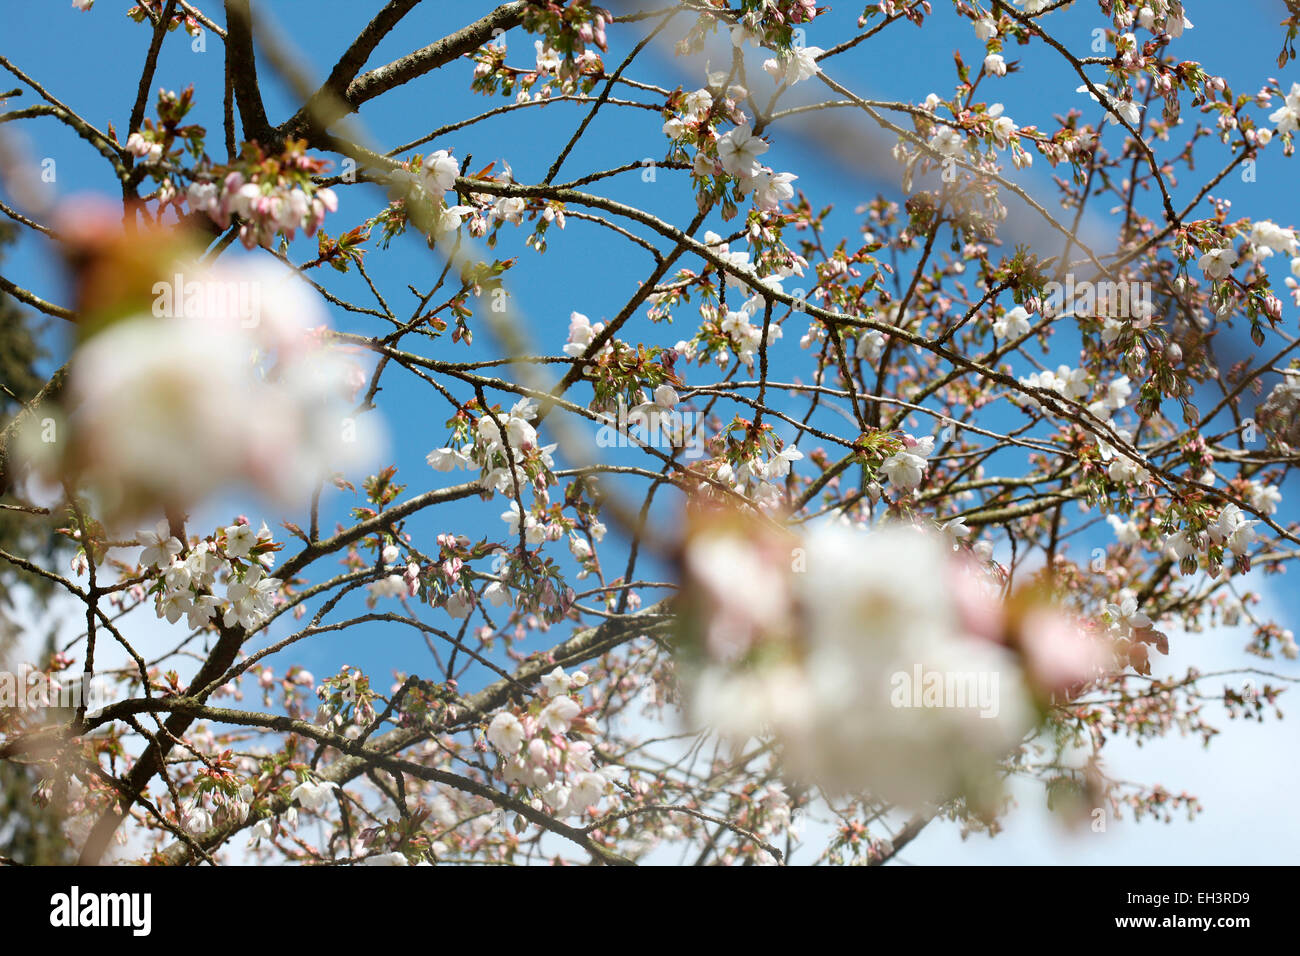 A taste of Spring, beautiful clusters of Great White Cherry, Tai Haku blossom Jane Ann Butler Photography JABP760 Stock Photo